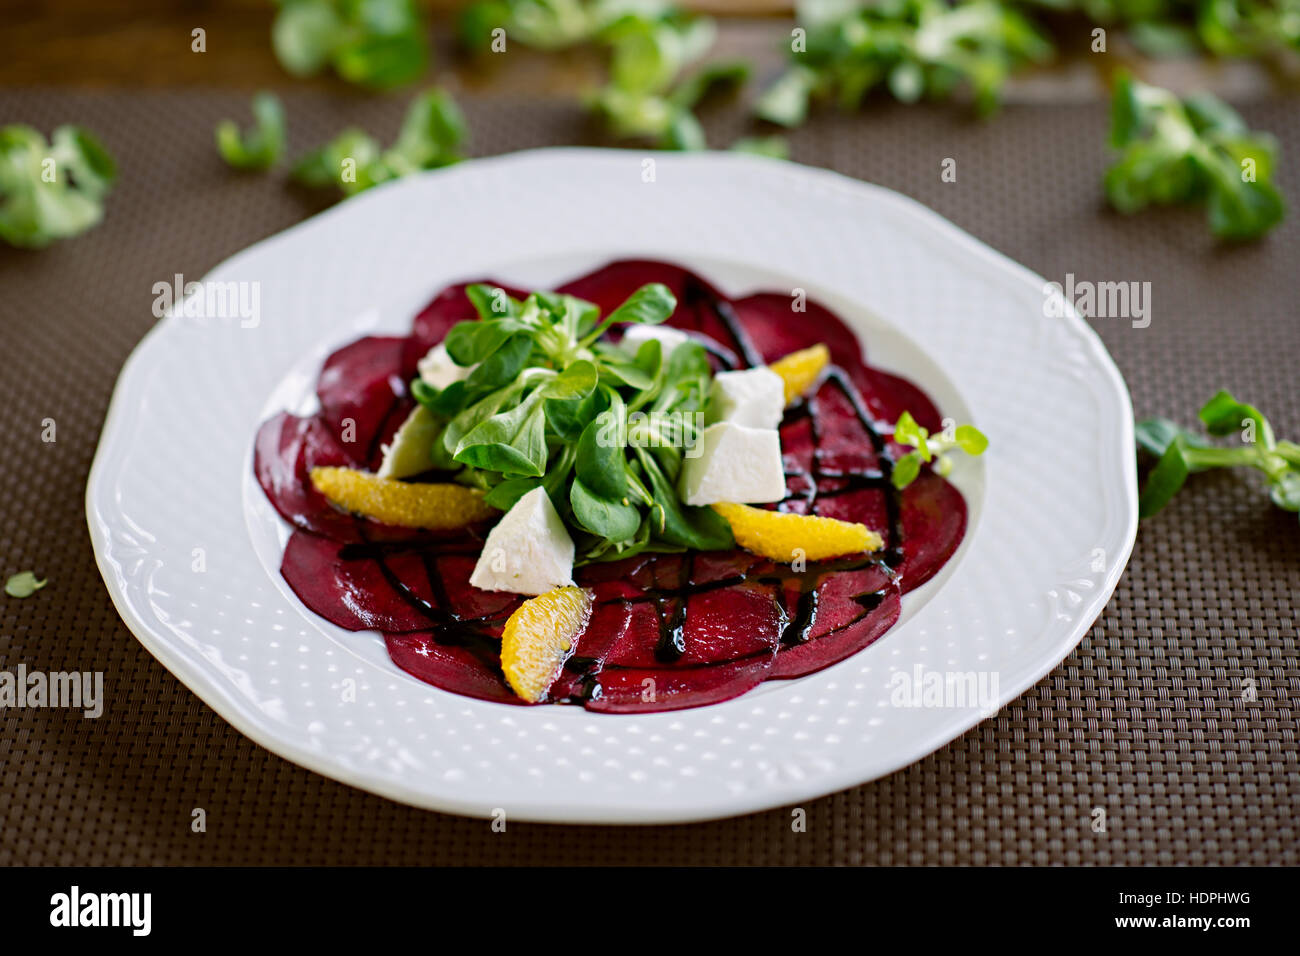 Healthy Vegetarian Salad with Beetroot, Goat Cheese, Orange Slices and Green Salad Served in Restaurant Stock Photo